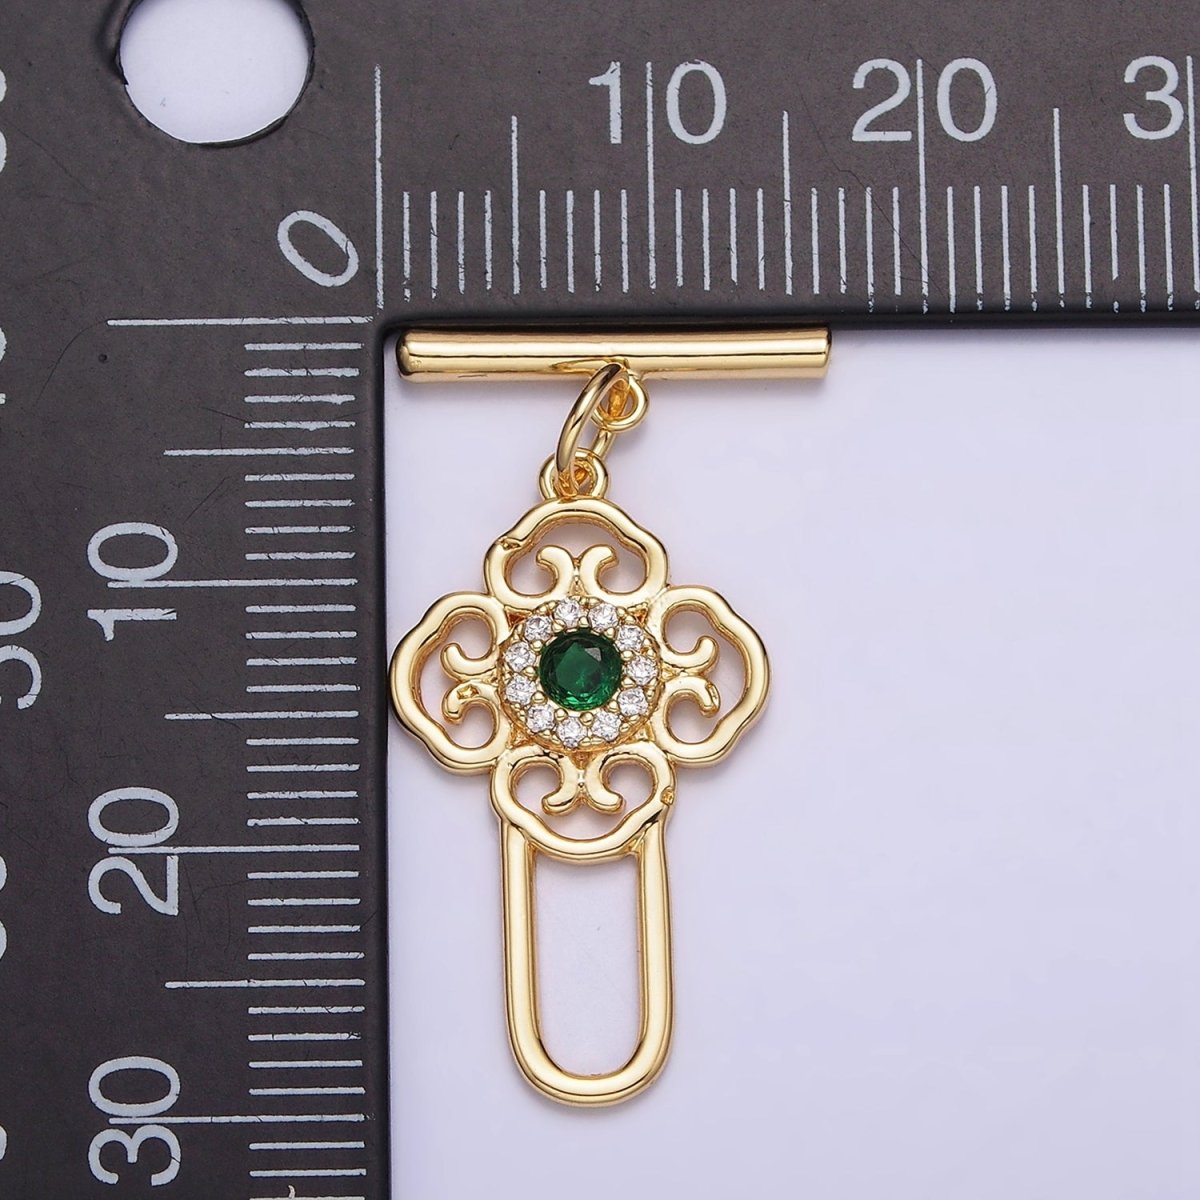 24K Gold Filled Green CZ Artisan Key Oblong Toggle Clasps Closure Jewelry Making Supply | Z-439 - DLUXCA